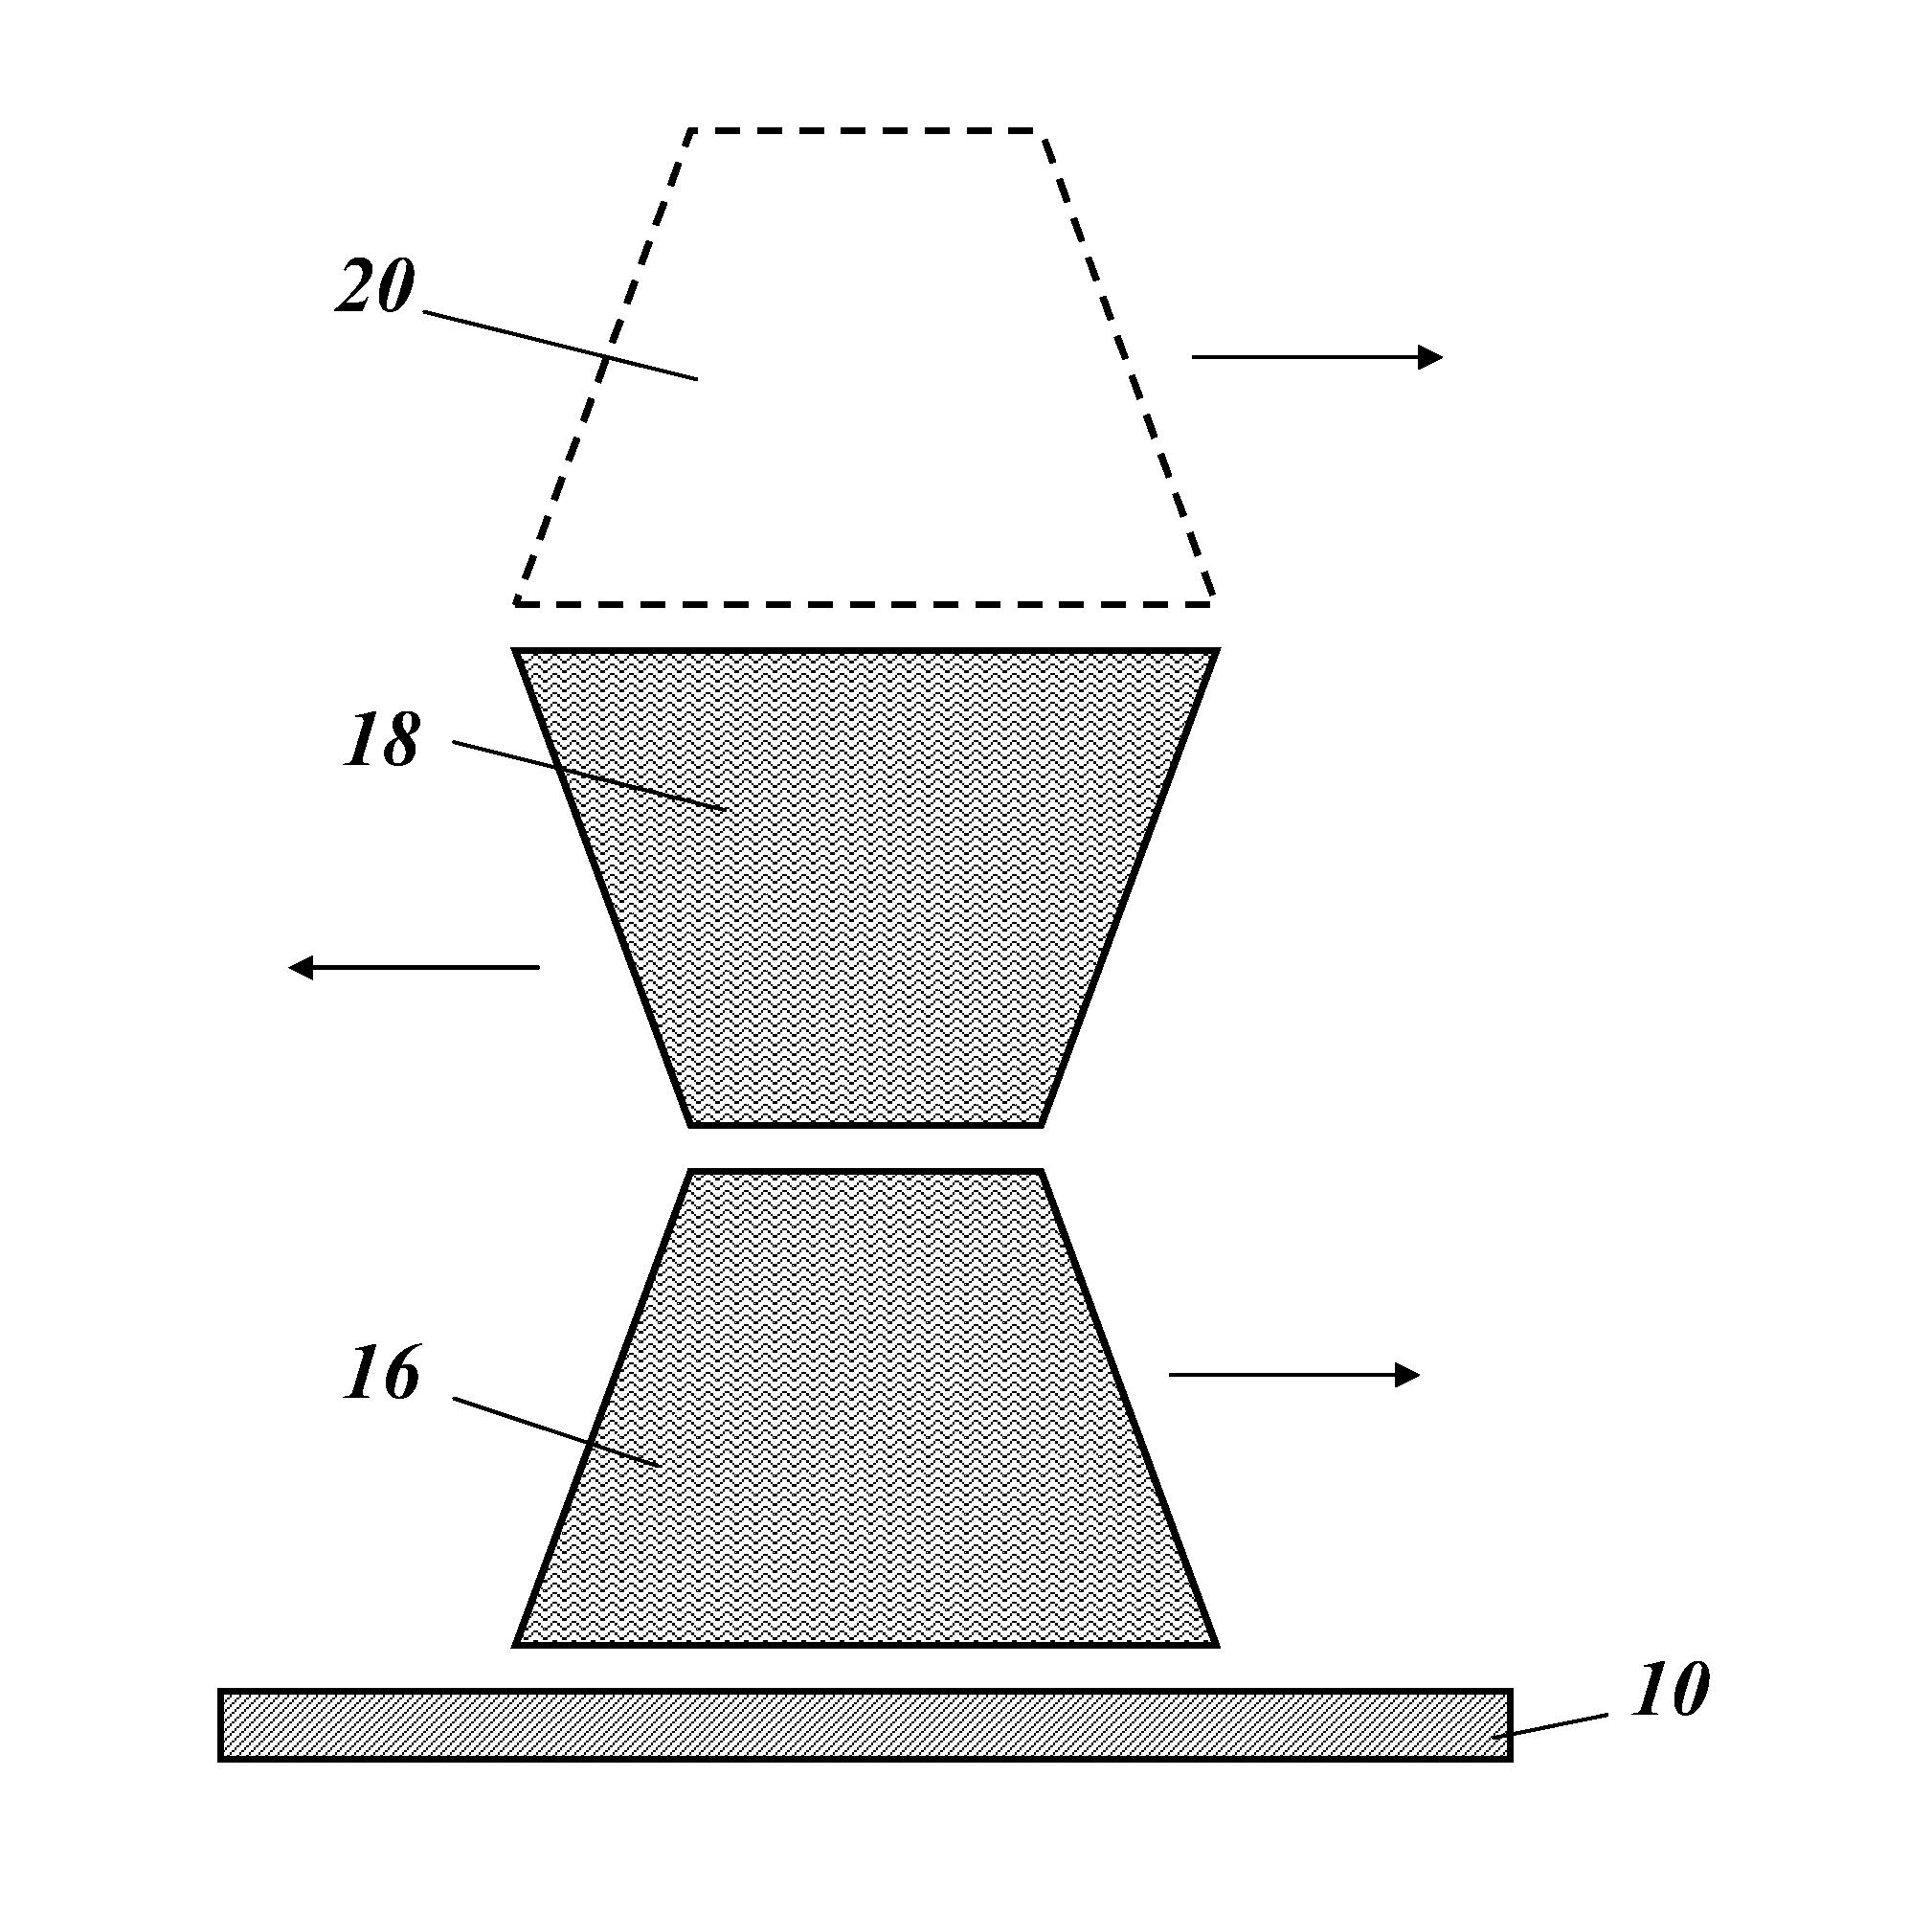 Process for producing a 3-dimensional component by selective laser melting (SLM)